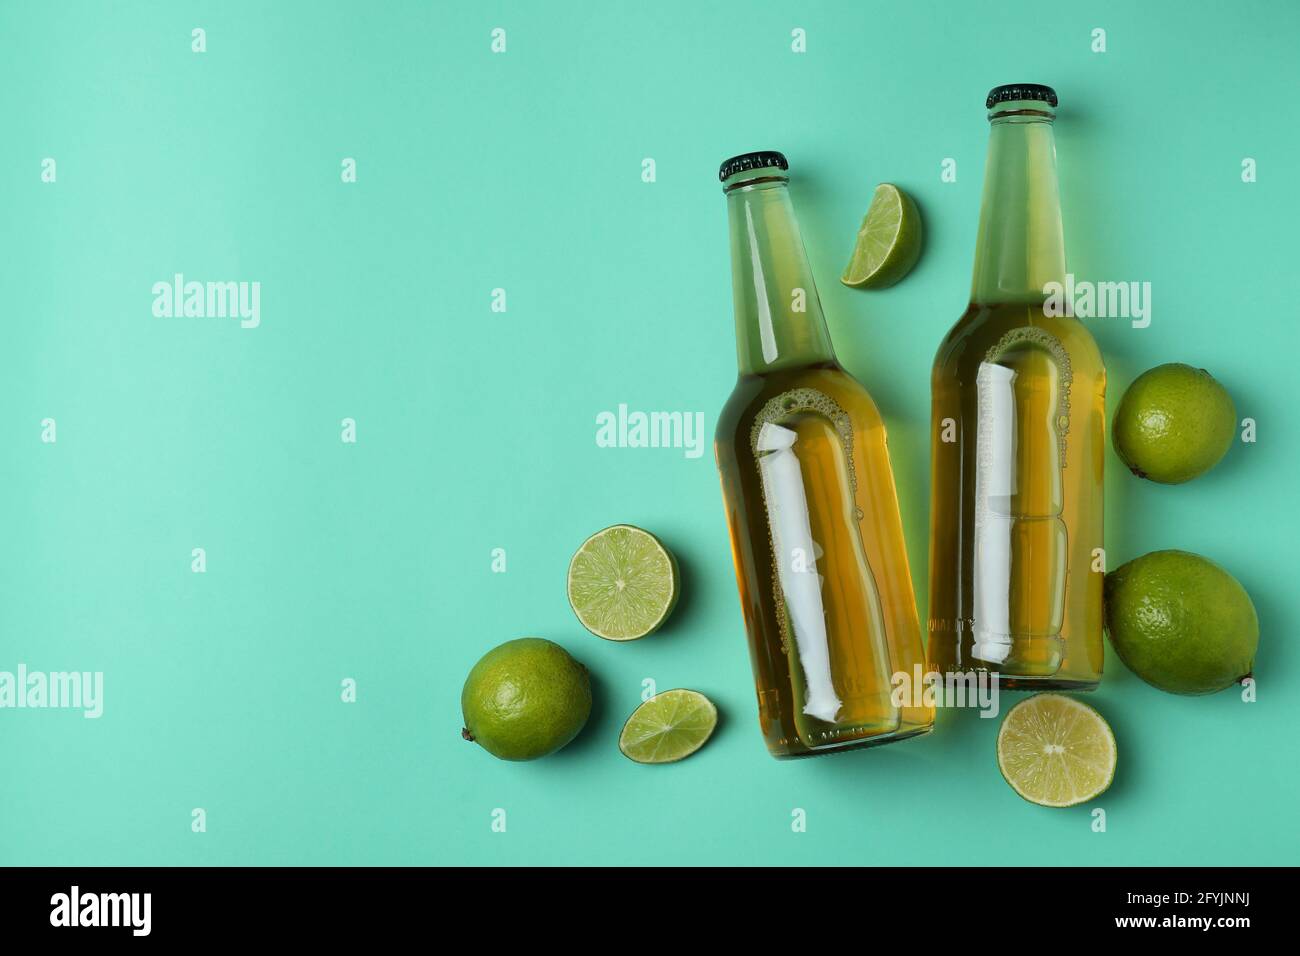 Bottles of beer and limes on mint background Stock Photo